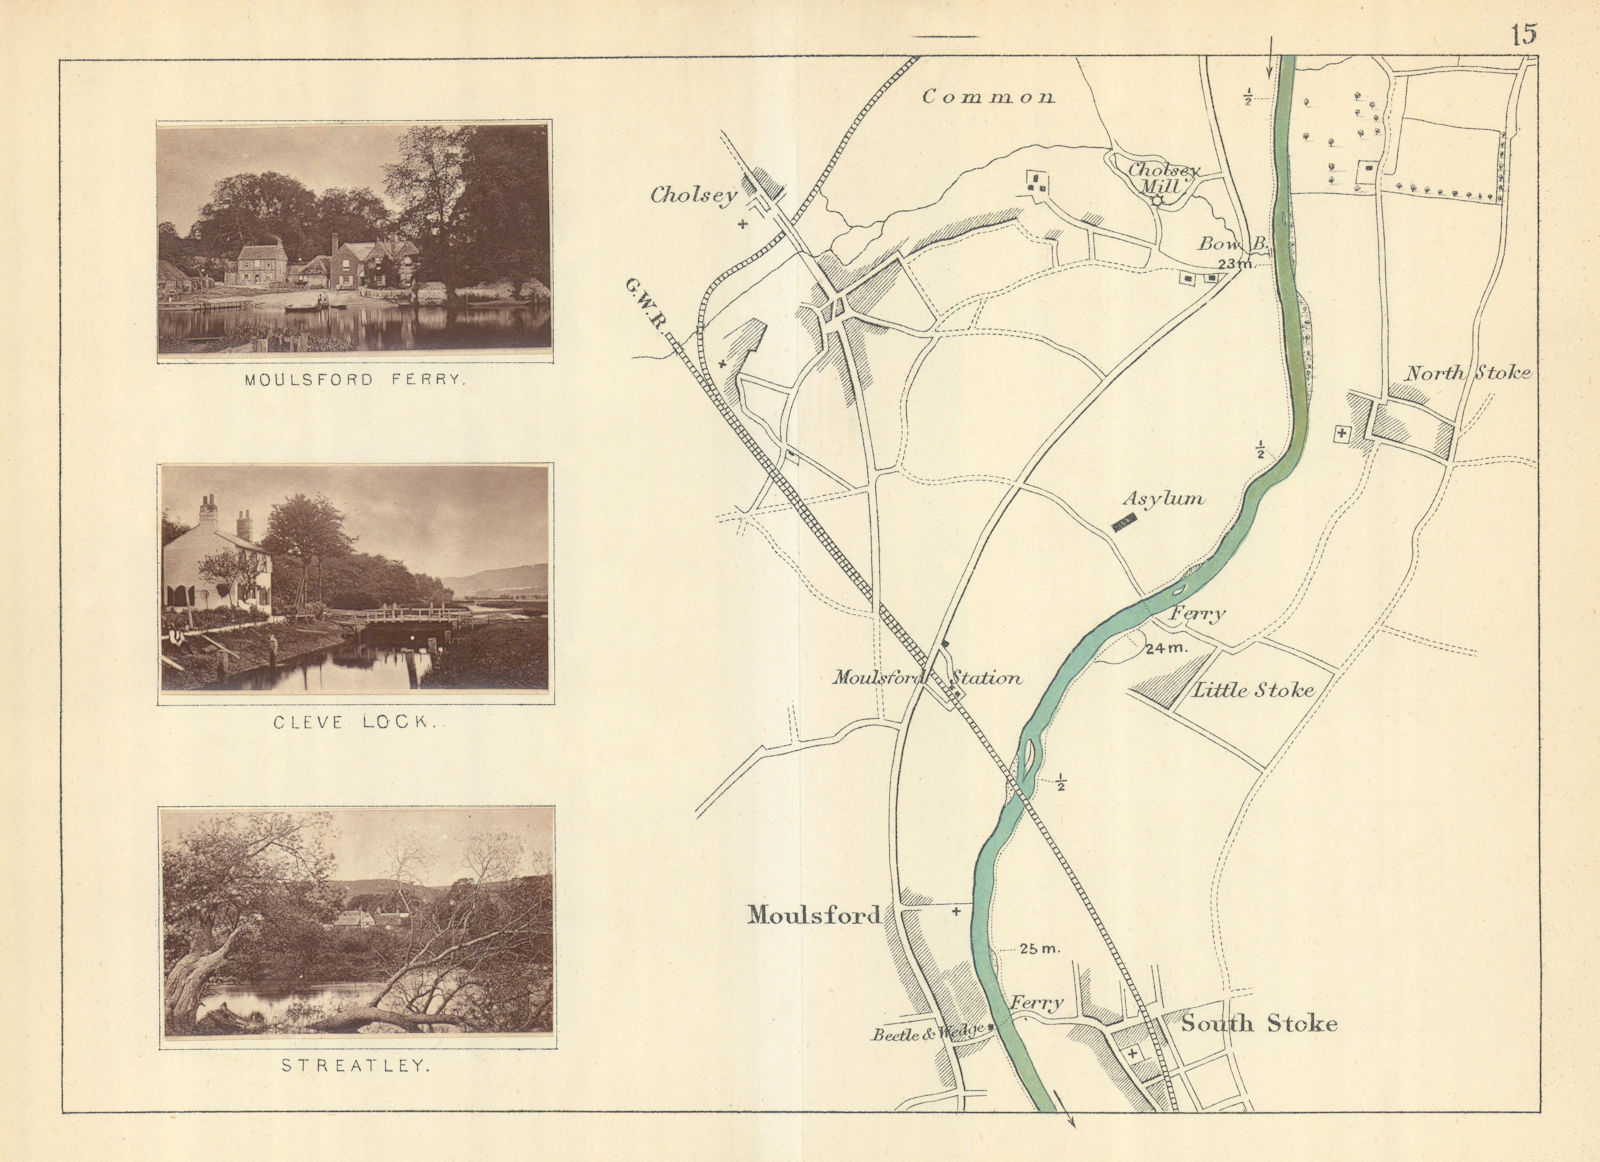 RIVER THAMES - Cholsey - Moulsford - South Stoke. Streatley. TAUNT 1879 map